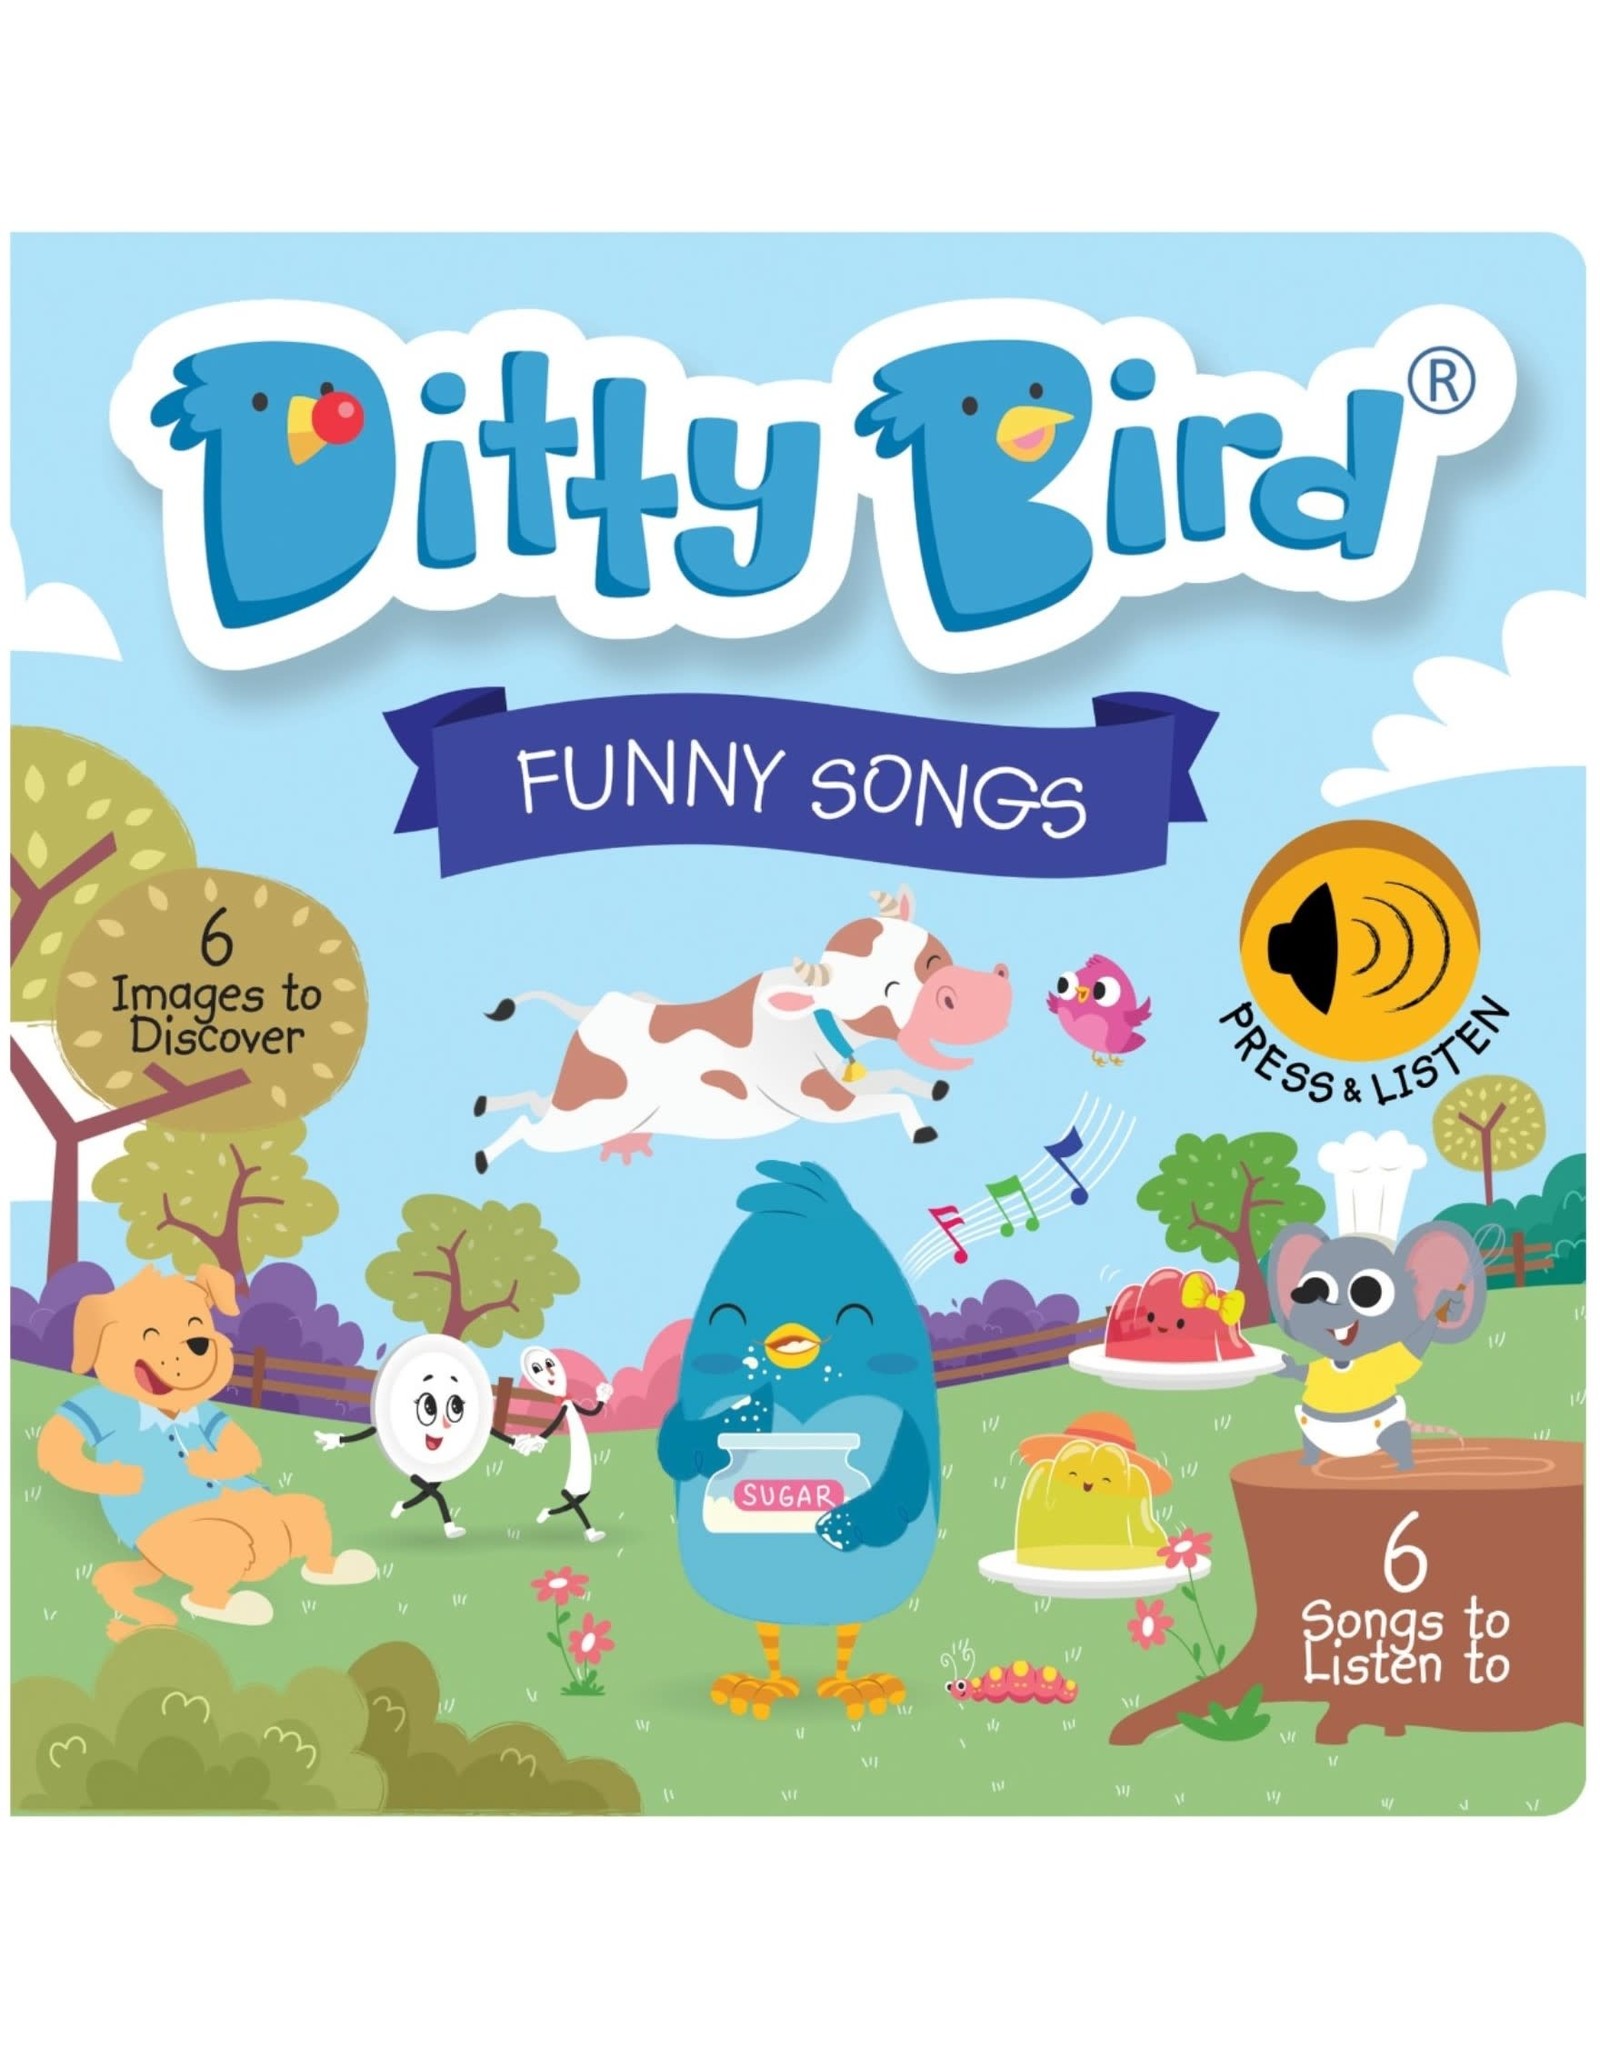 Ditty Bird Ditty Bird Baby Sound Book: Funny Songs